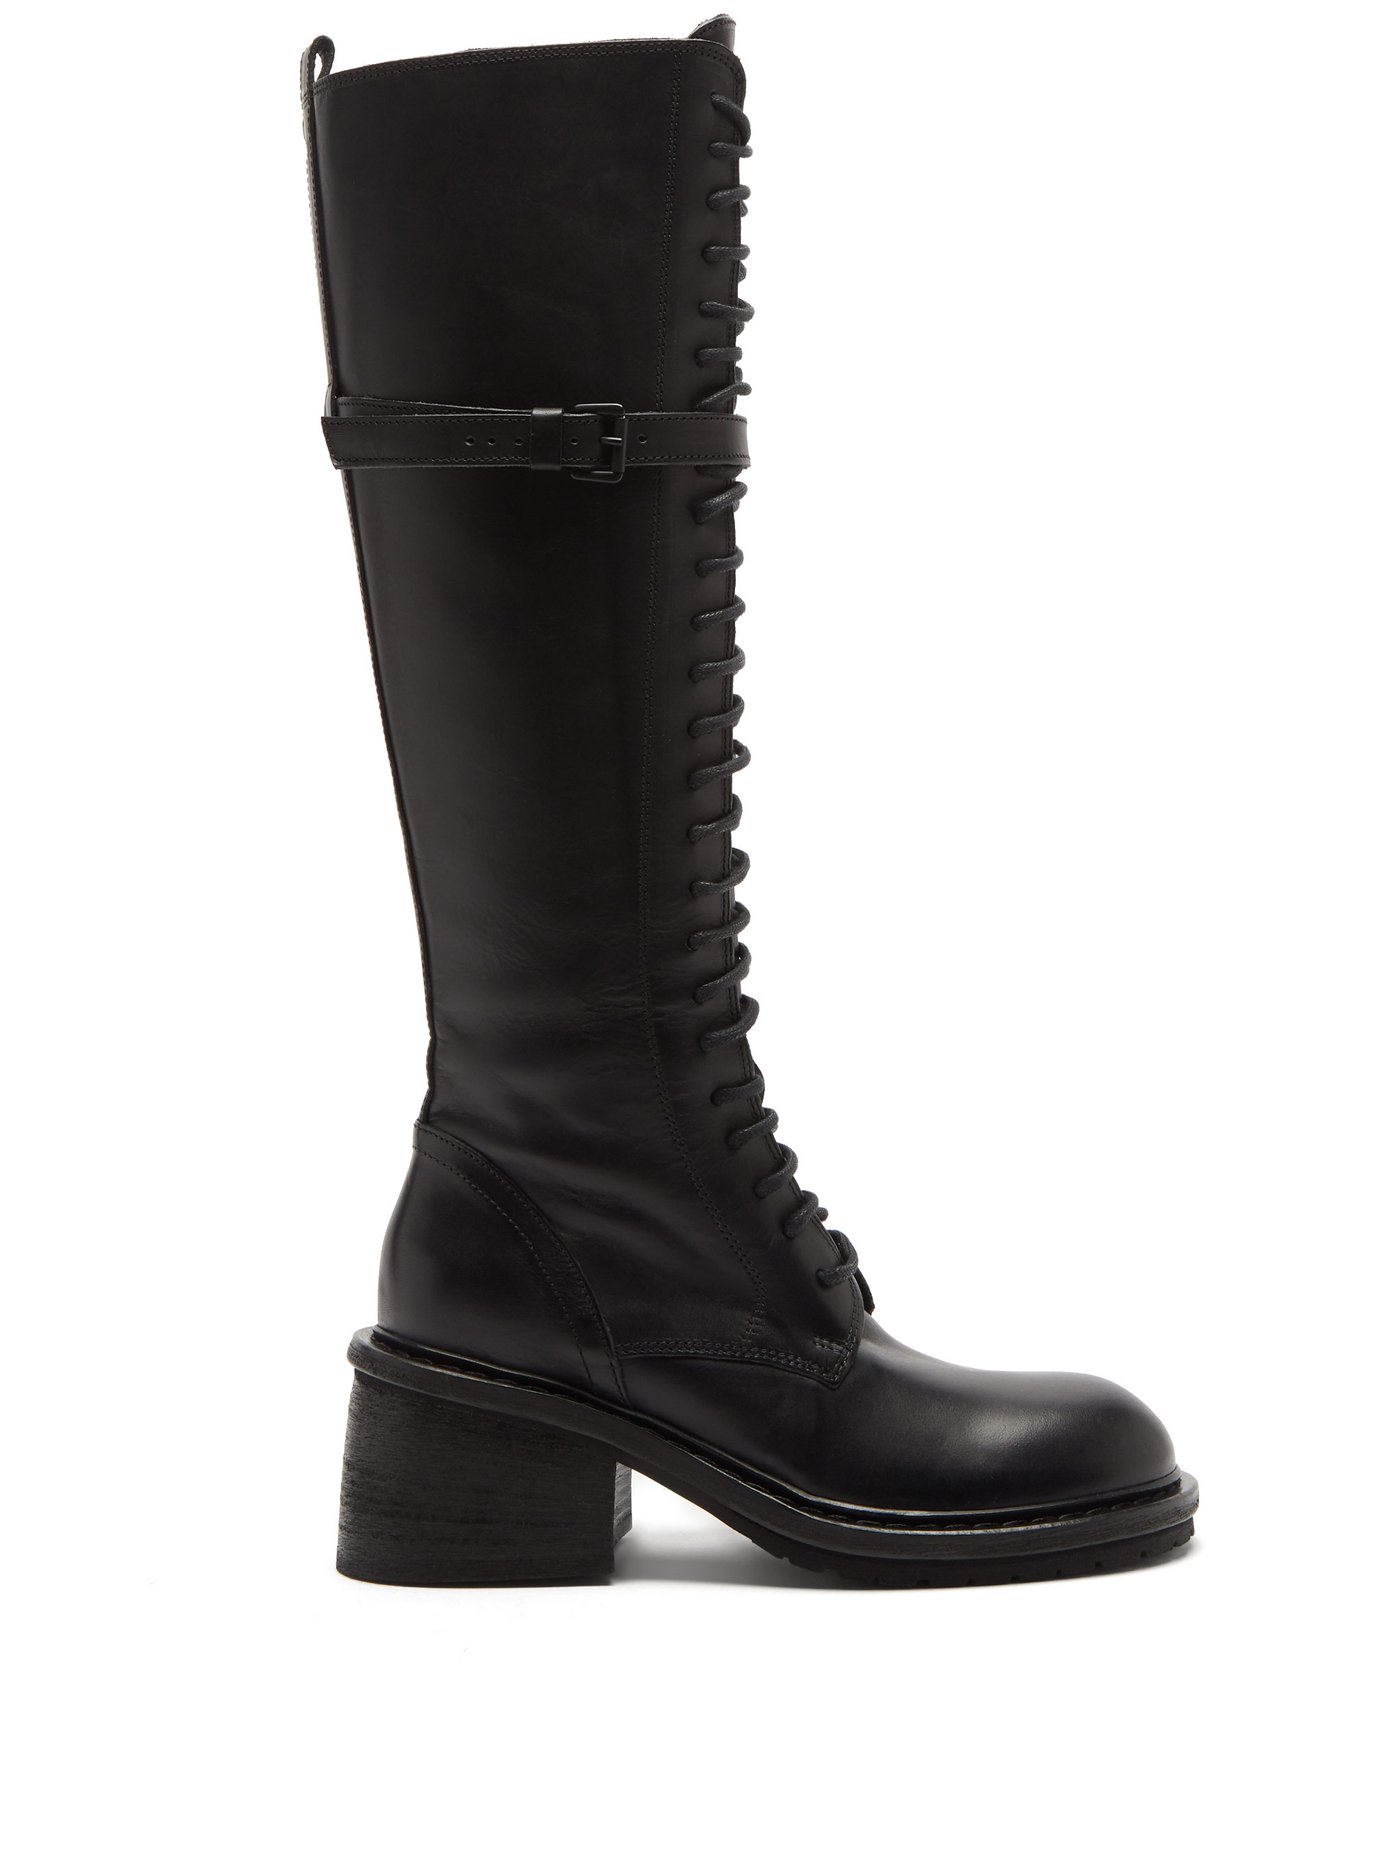 black lace up knee high boots